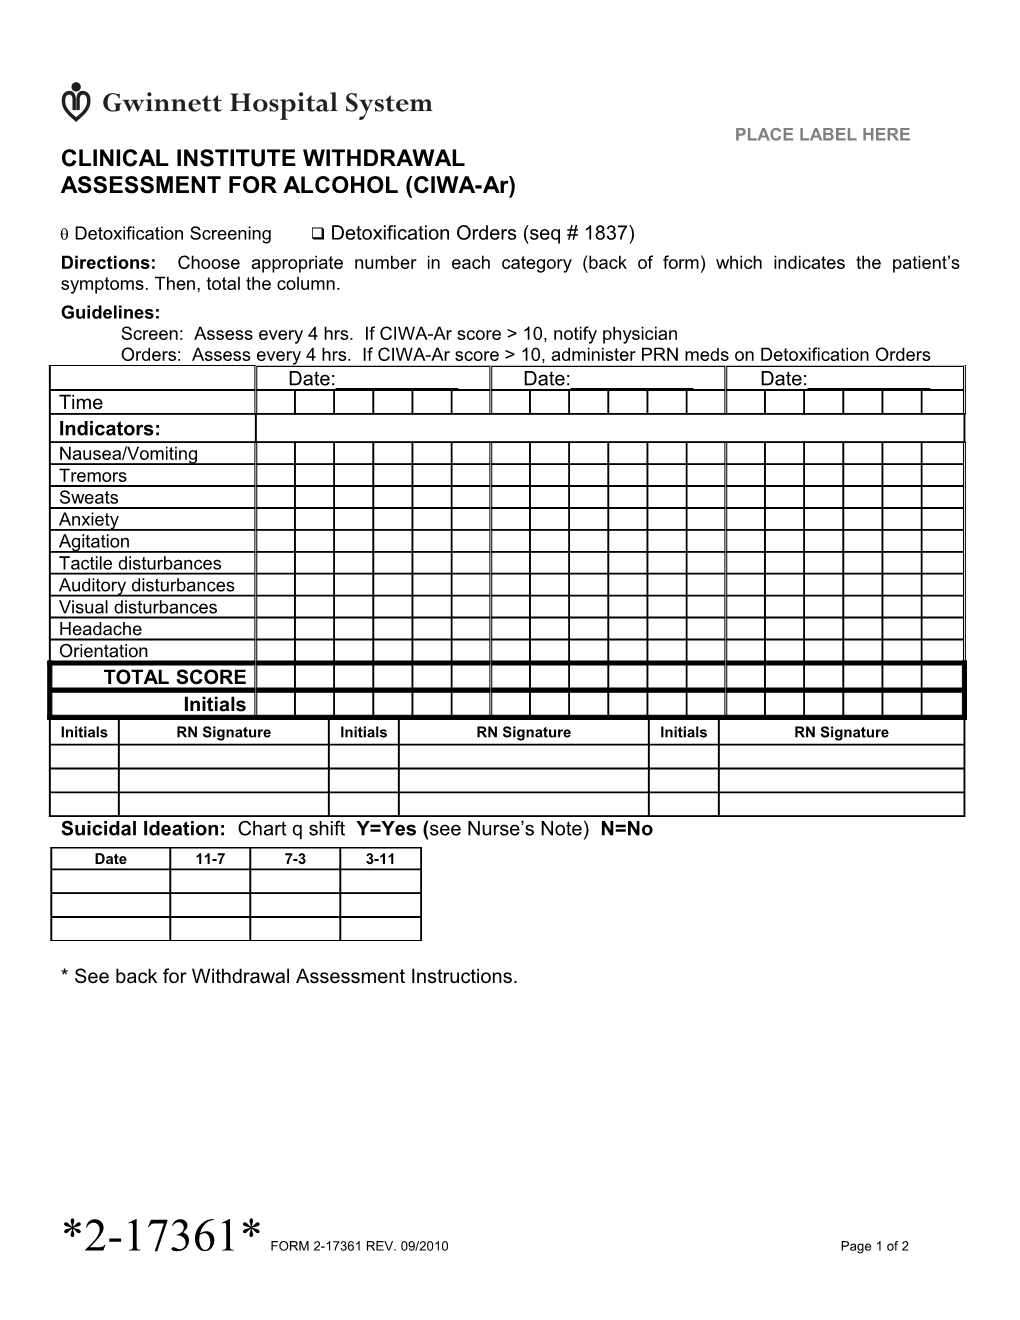 Clinical Institute Withdrawal Assessment for Alcohol (CIWA-Ar)